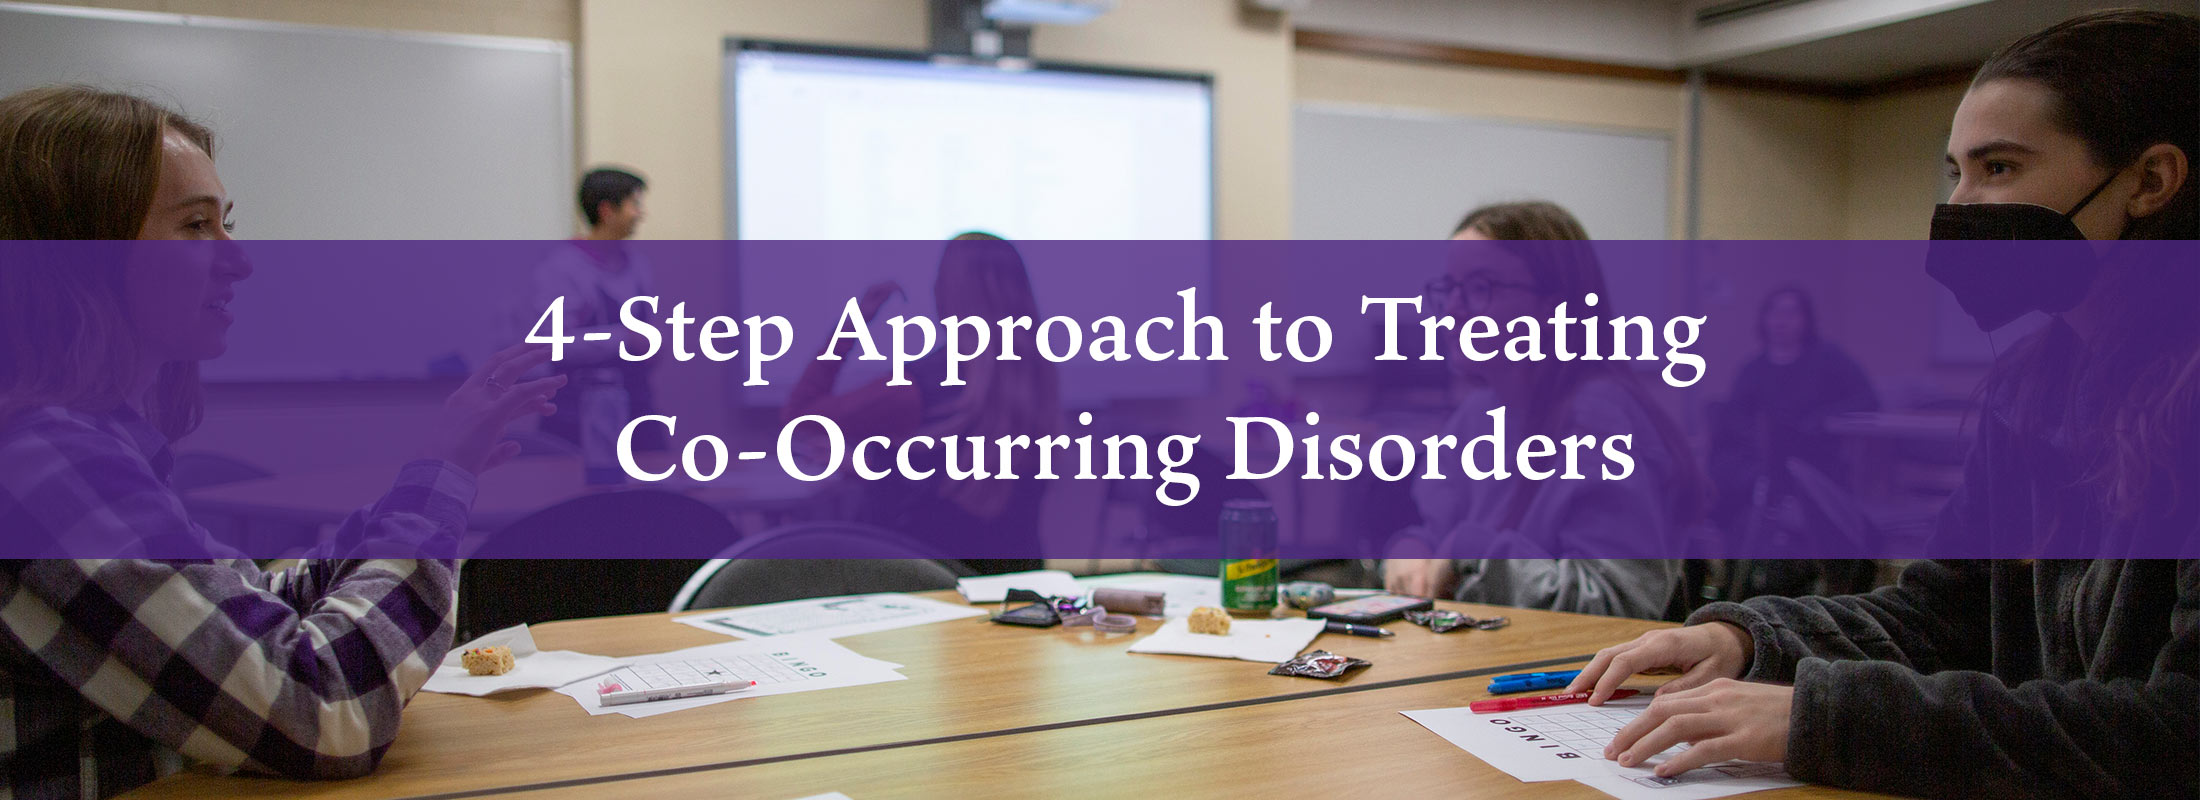 4 step approach to treating co-occurring disorders